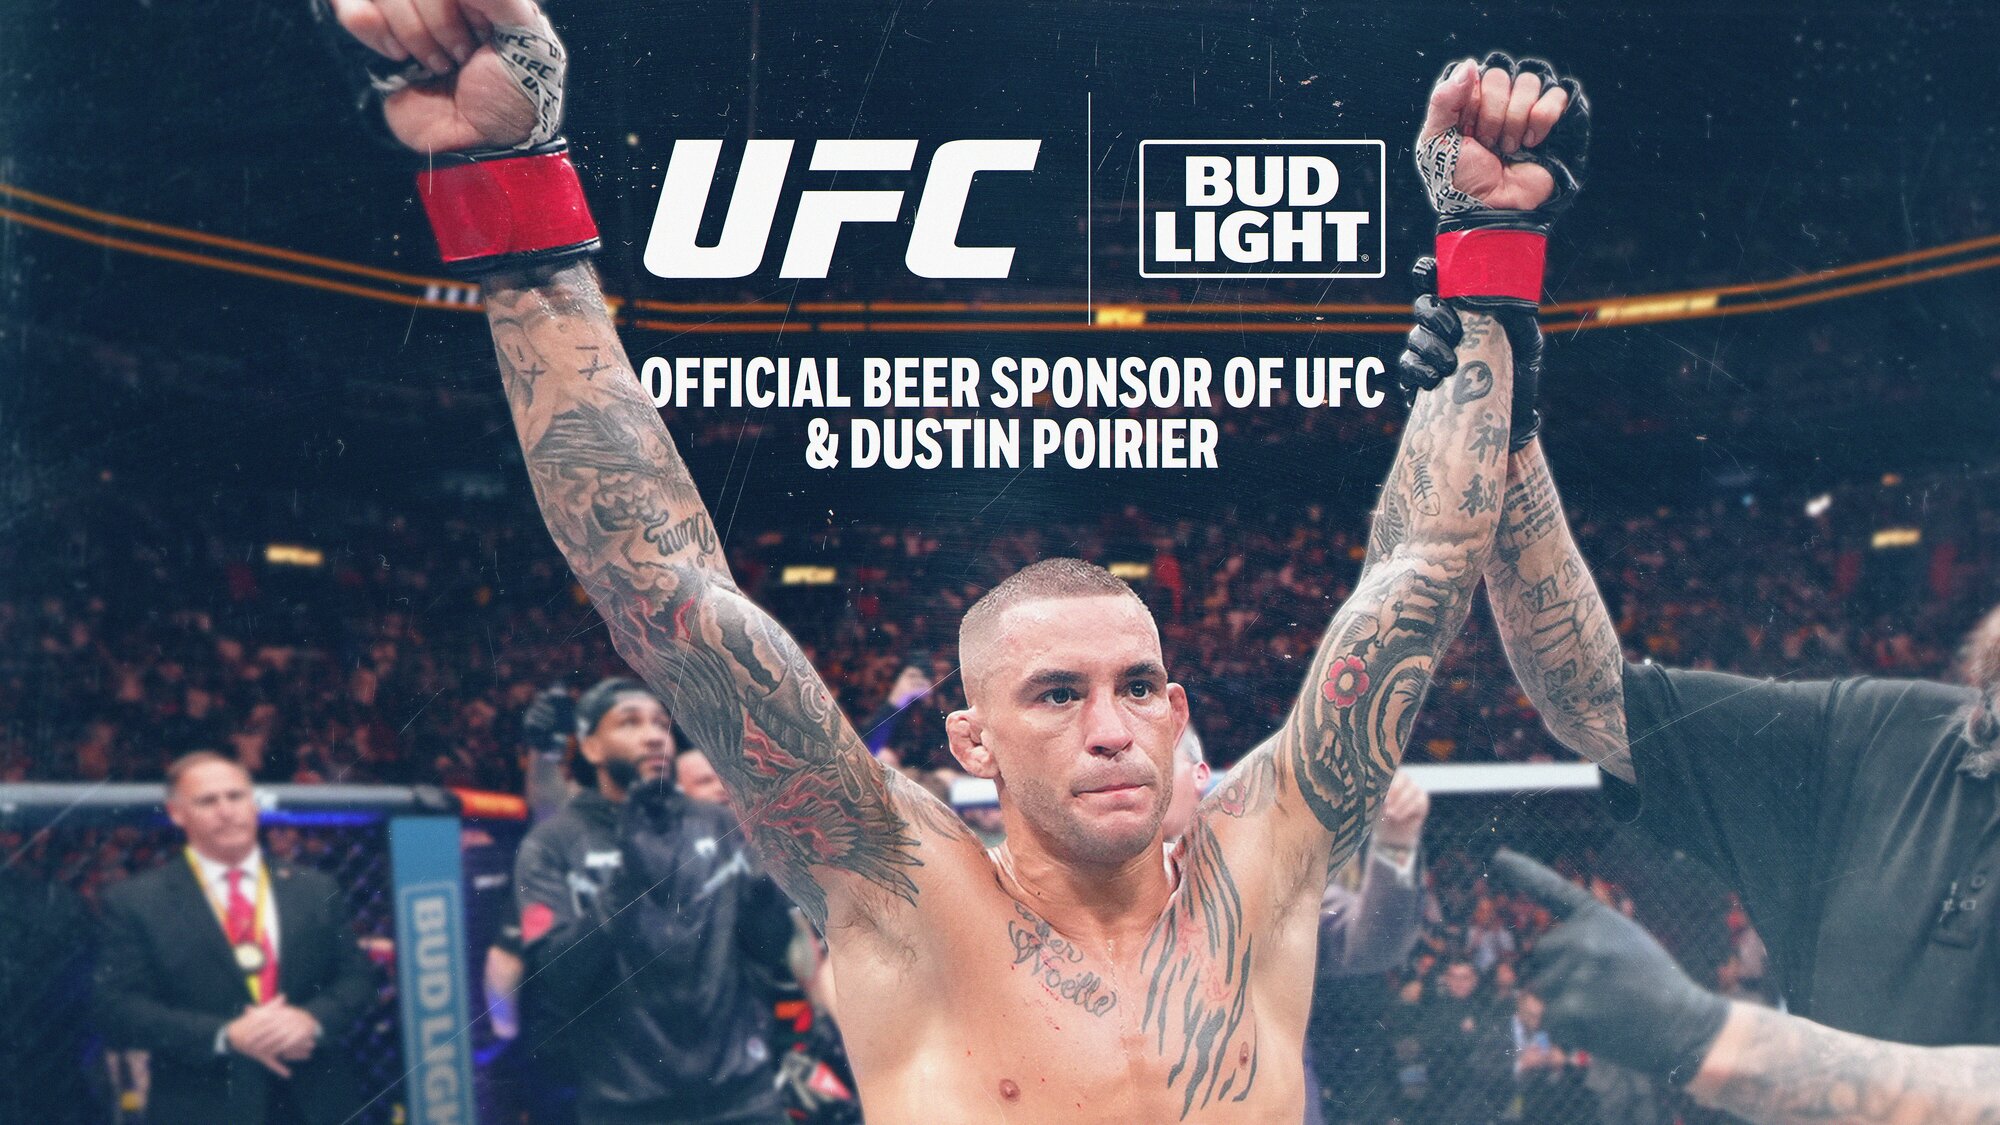 Bud Light, The Official Beer Sponsor Of The UFC, Lands Knockout Partnership With Top UFC Fighter Dustin “The Diamond” Poirier